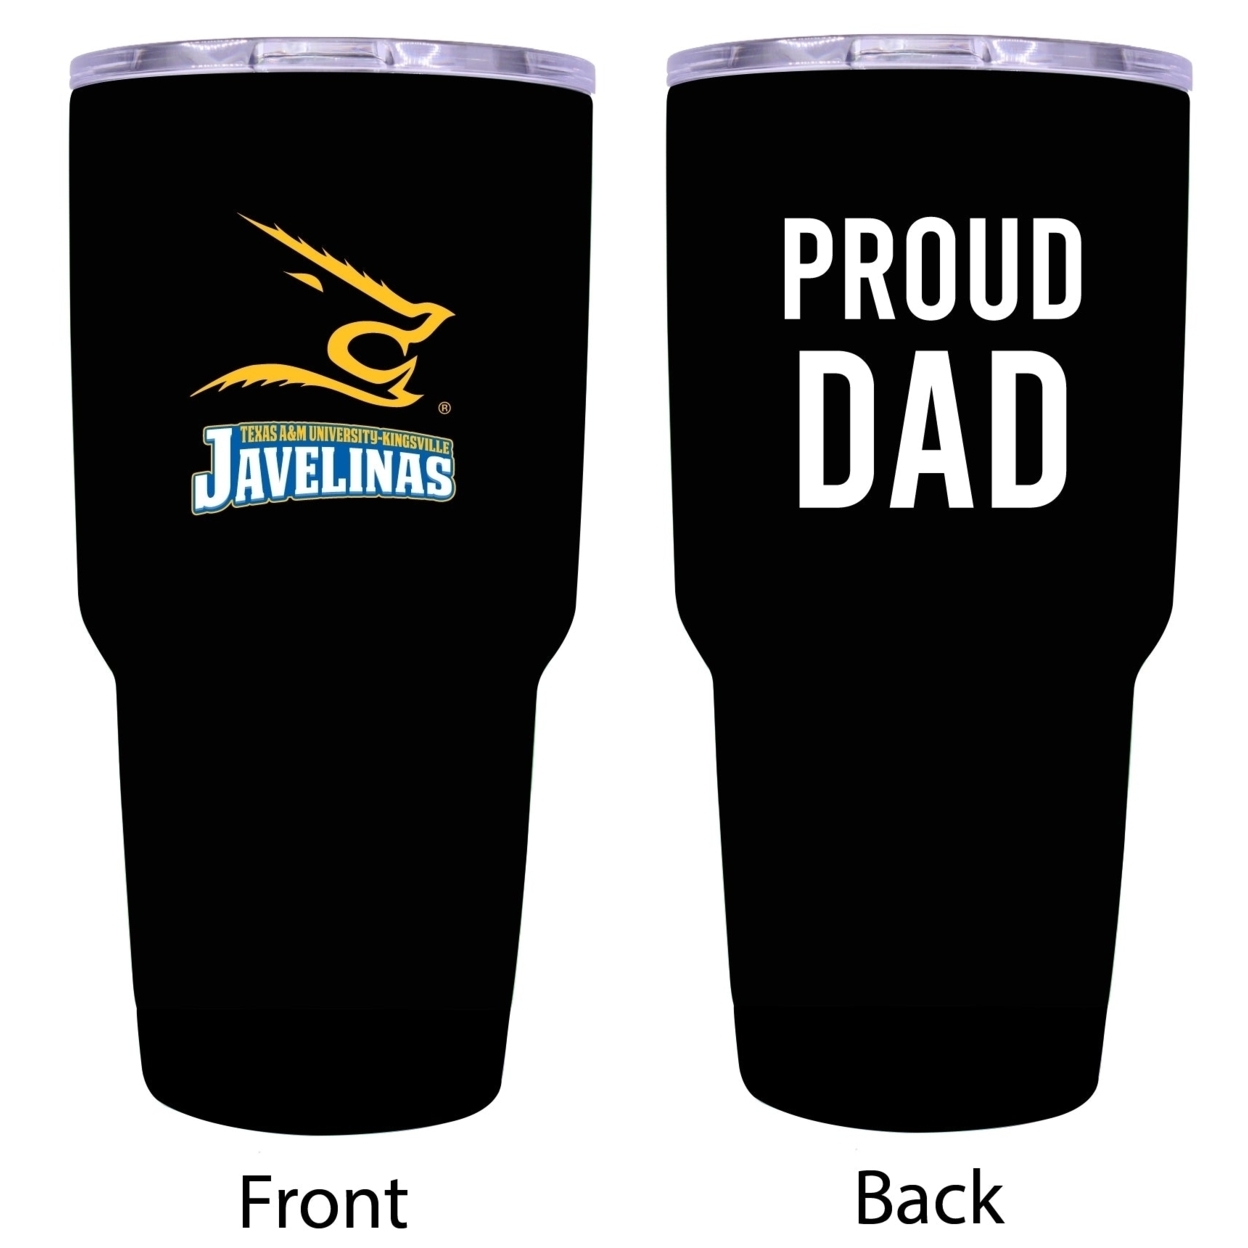 R And R Imports Texas A&M Kingsville Javelinas Proud Dad 24 Oz Insulated Stainless Steel Tumblers Black.